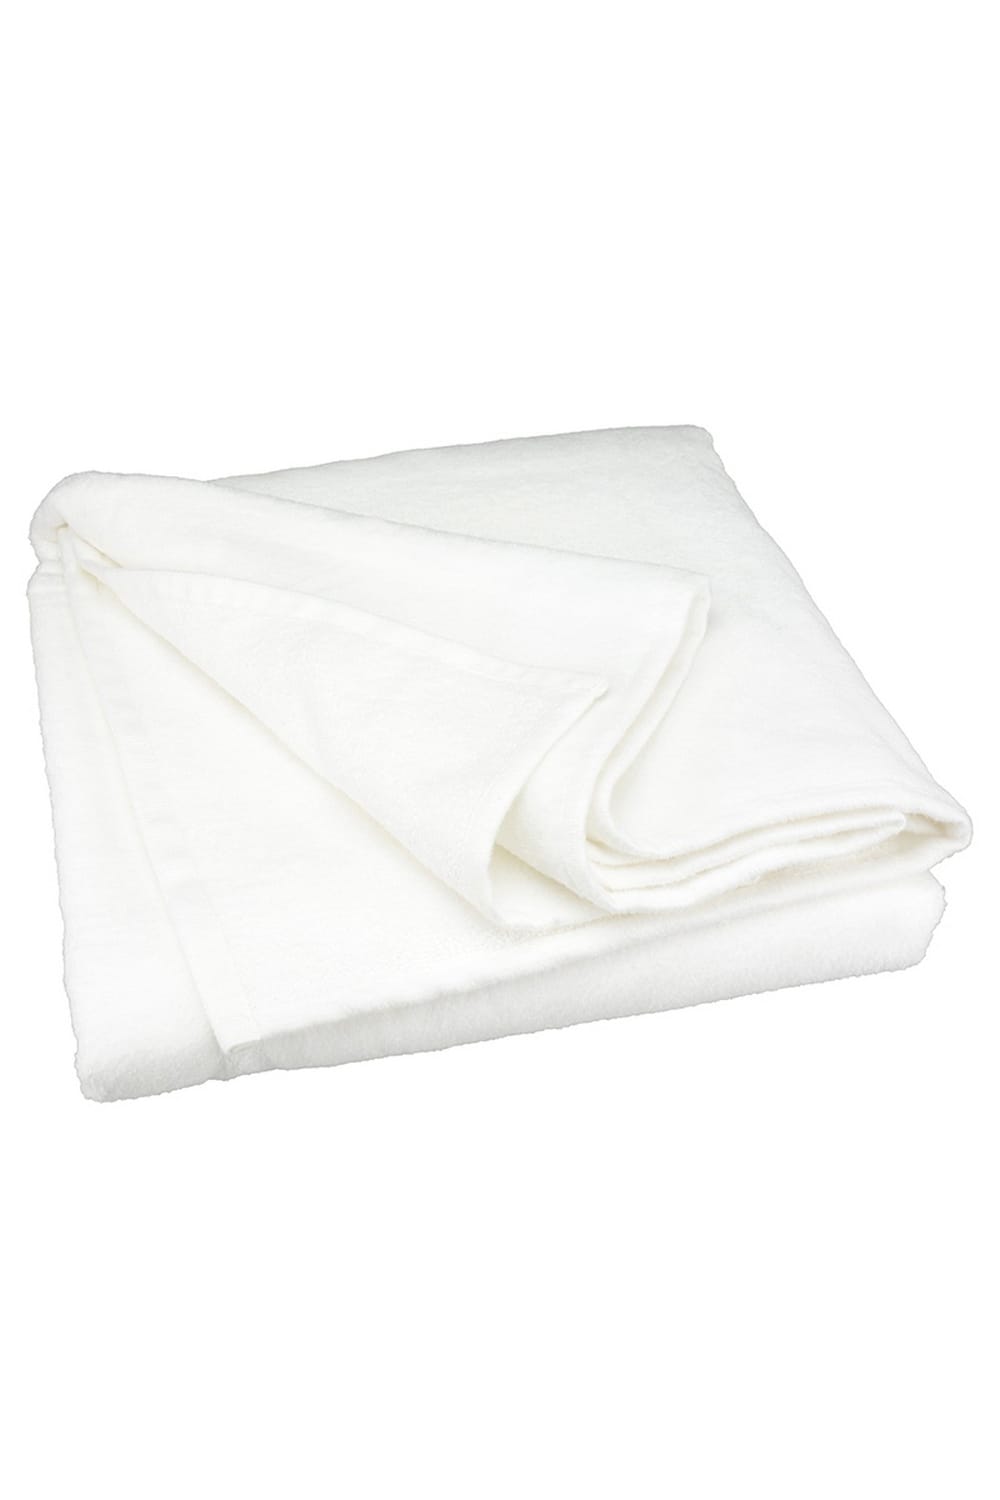 A&R Towels Subli-Me All-over Beach Towel (White) (Kitchen)